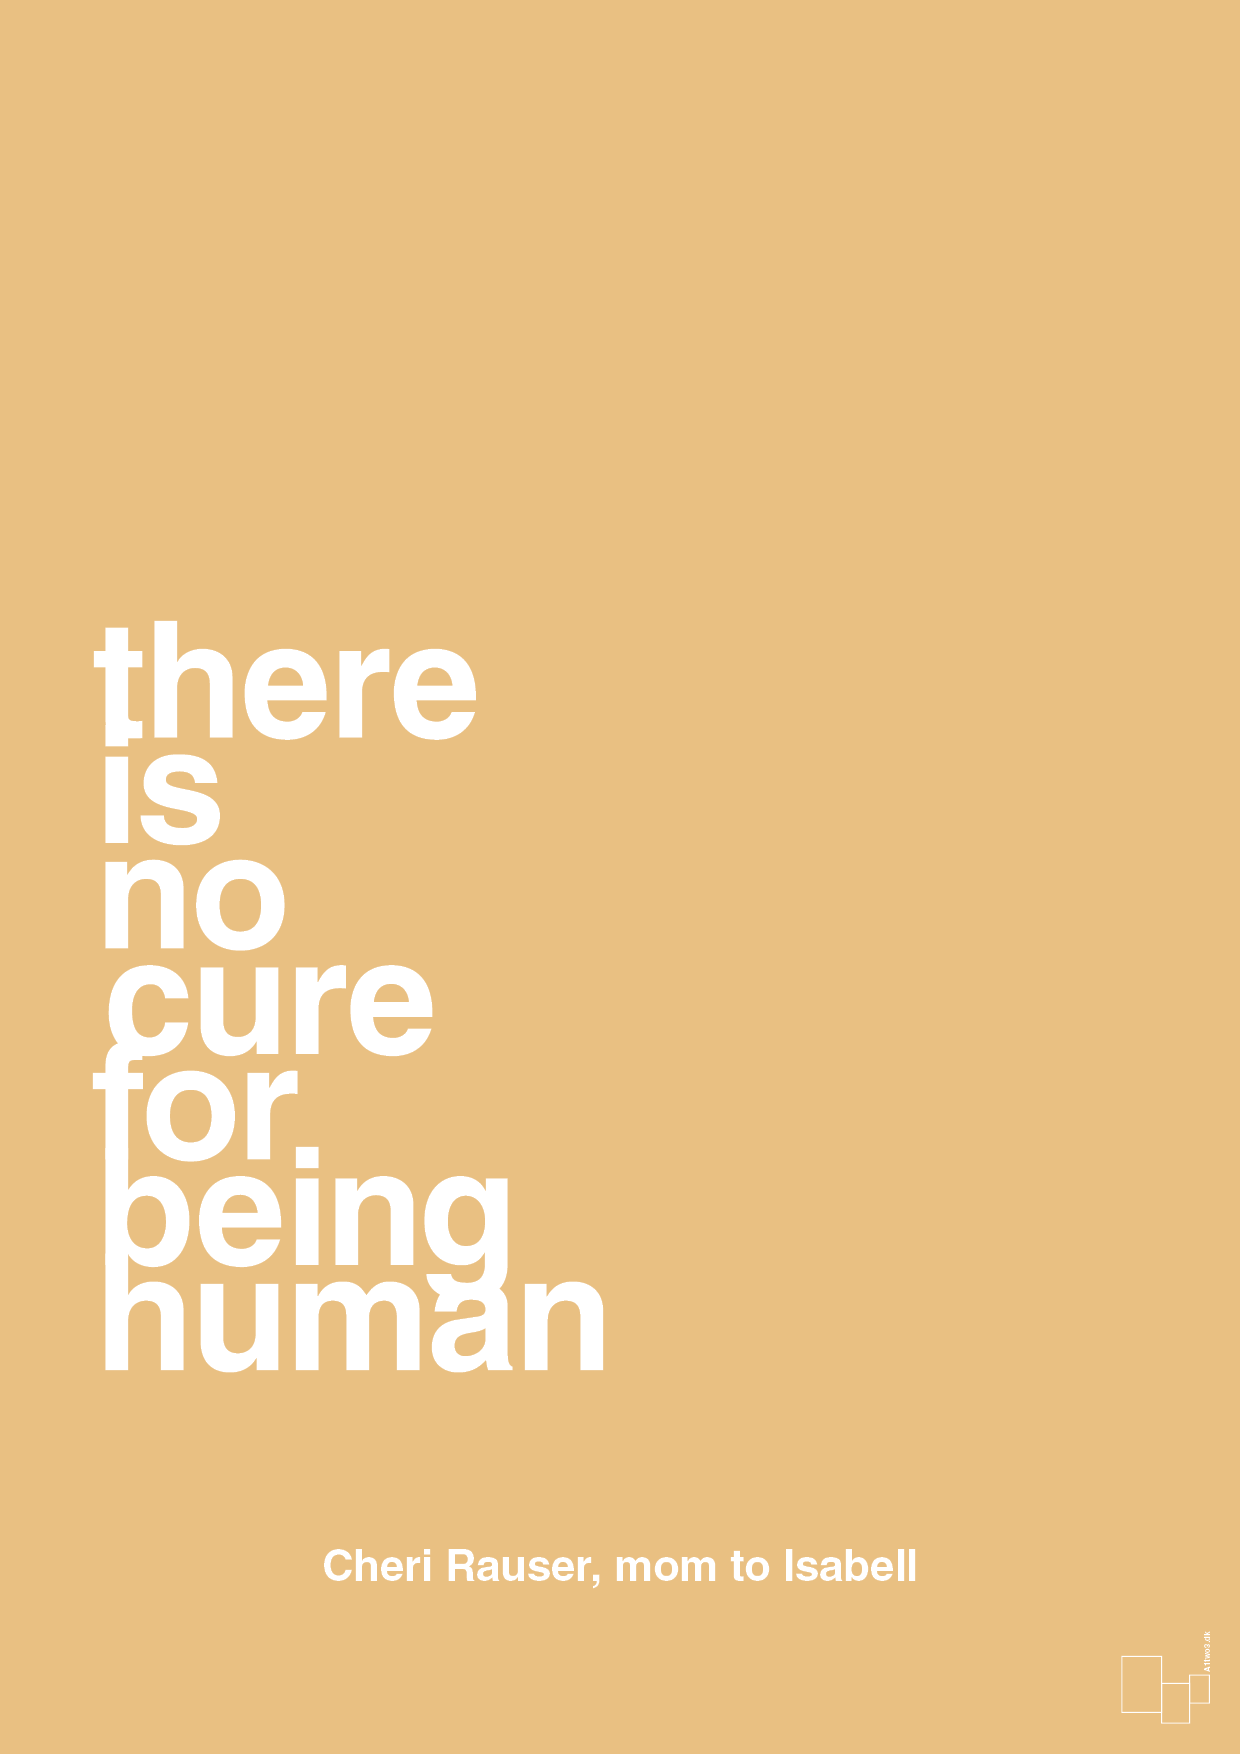 there is no cure for being human - Plakat med Samfund i Charismatic